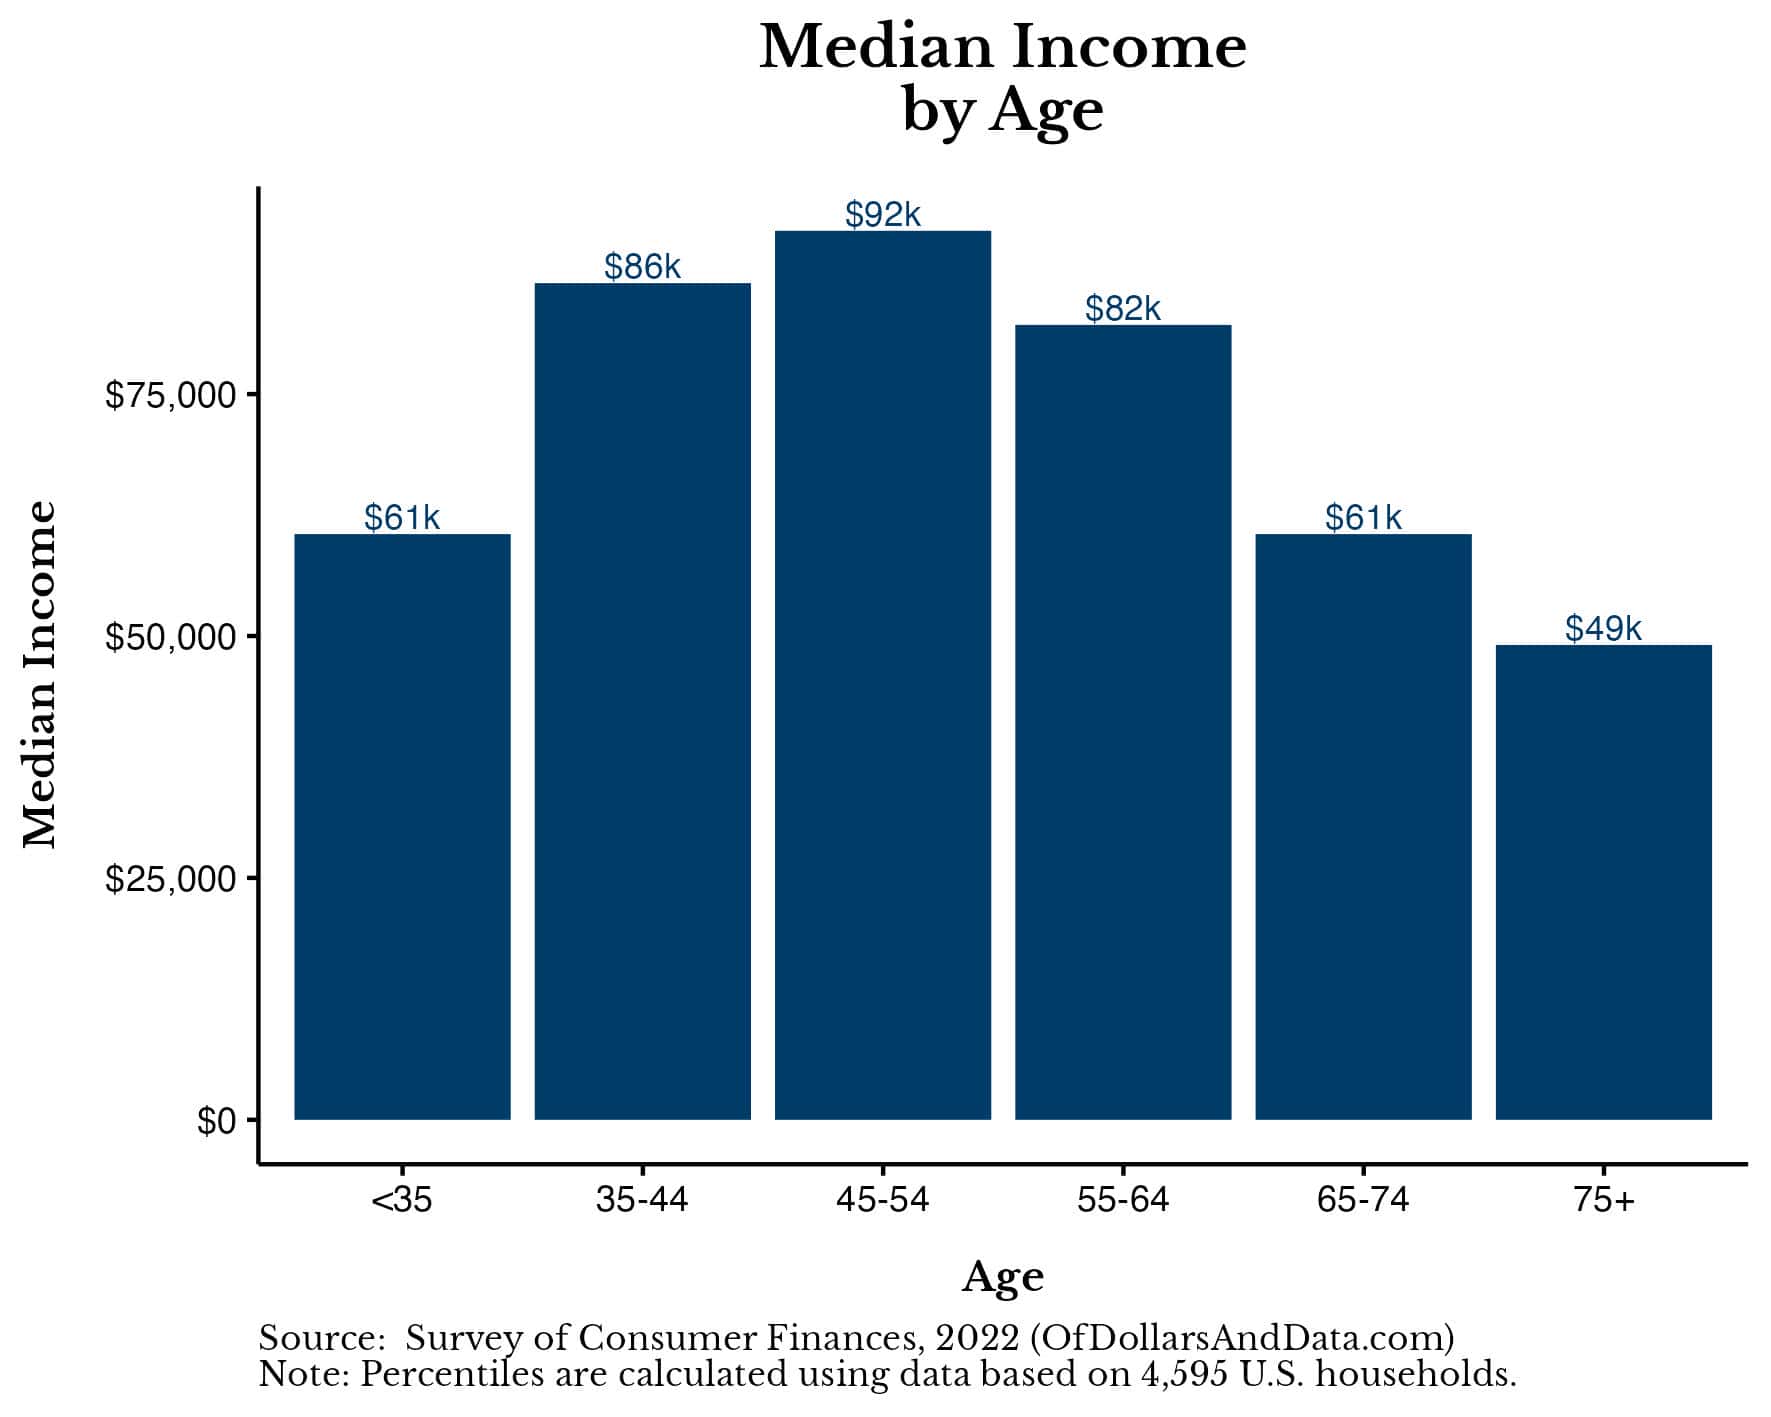 Median household income by age in the U.S. from the 2022 Survey of Consumer Finances.